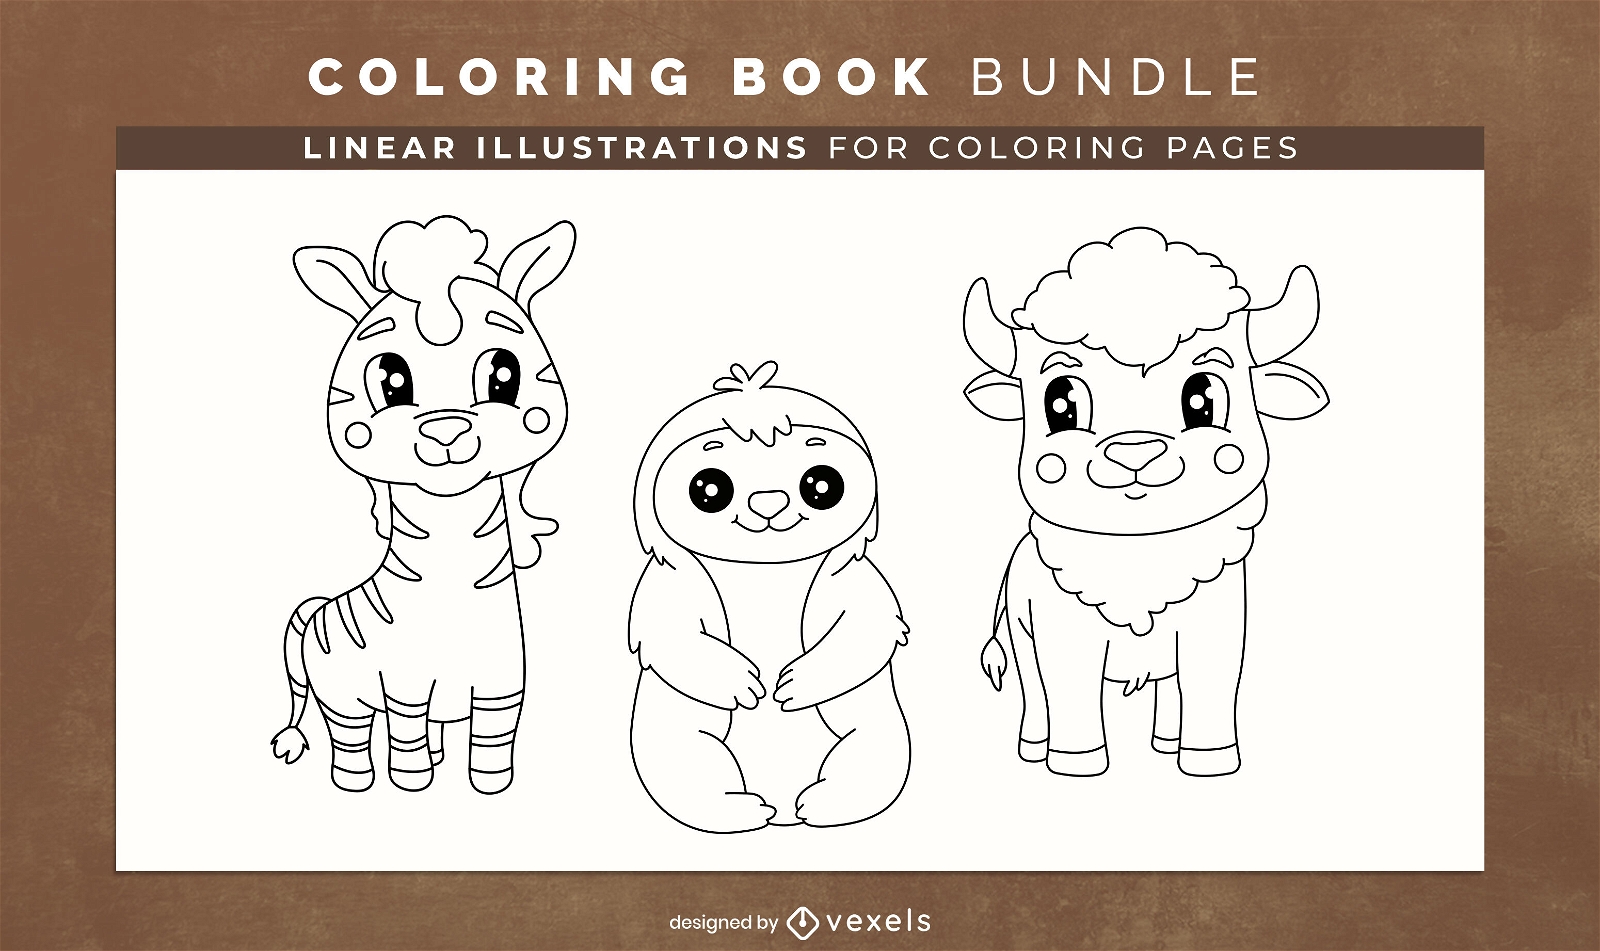 Cute animals coloring book page design